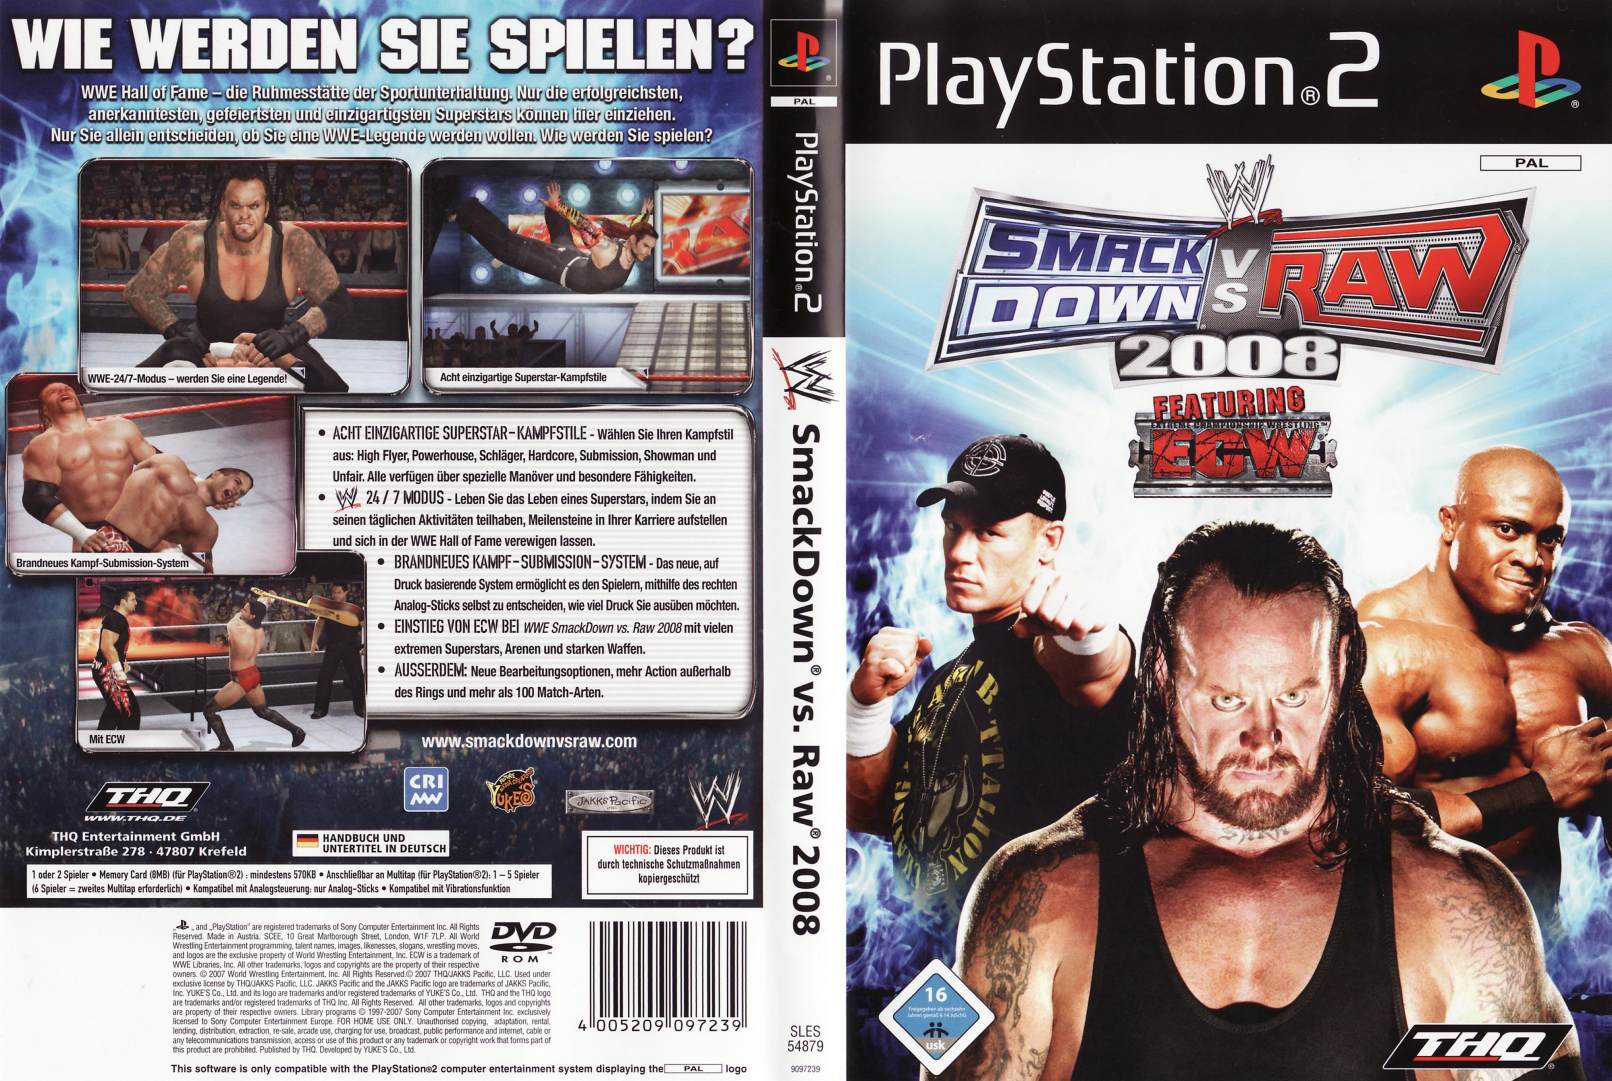 Smack Down Vs Raw 08 D Playstation 2 Covers Cover Century Over 500 000 Album Art Covers For Free